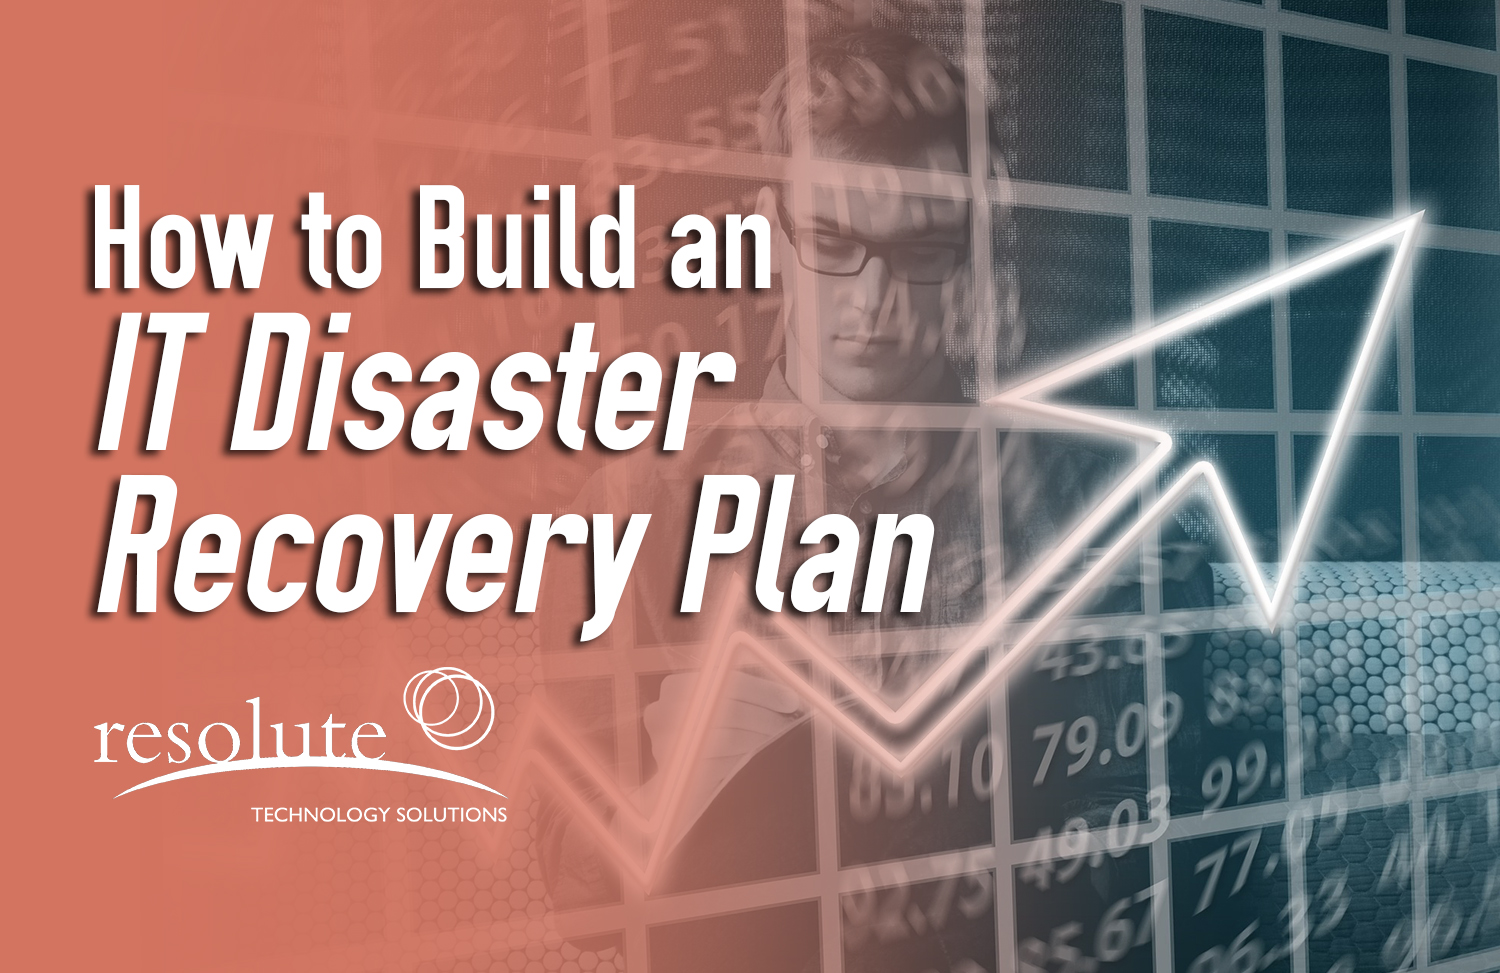 How to Build an IT Disaster Recovery Plan